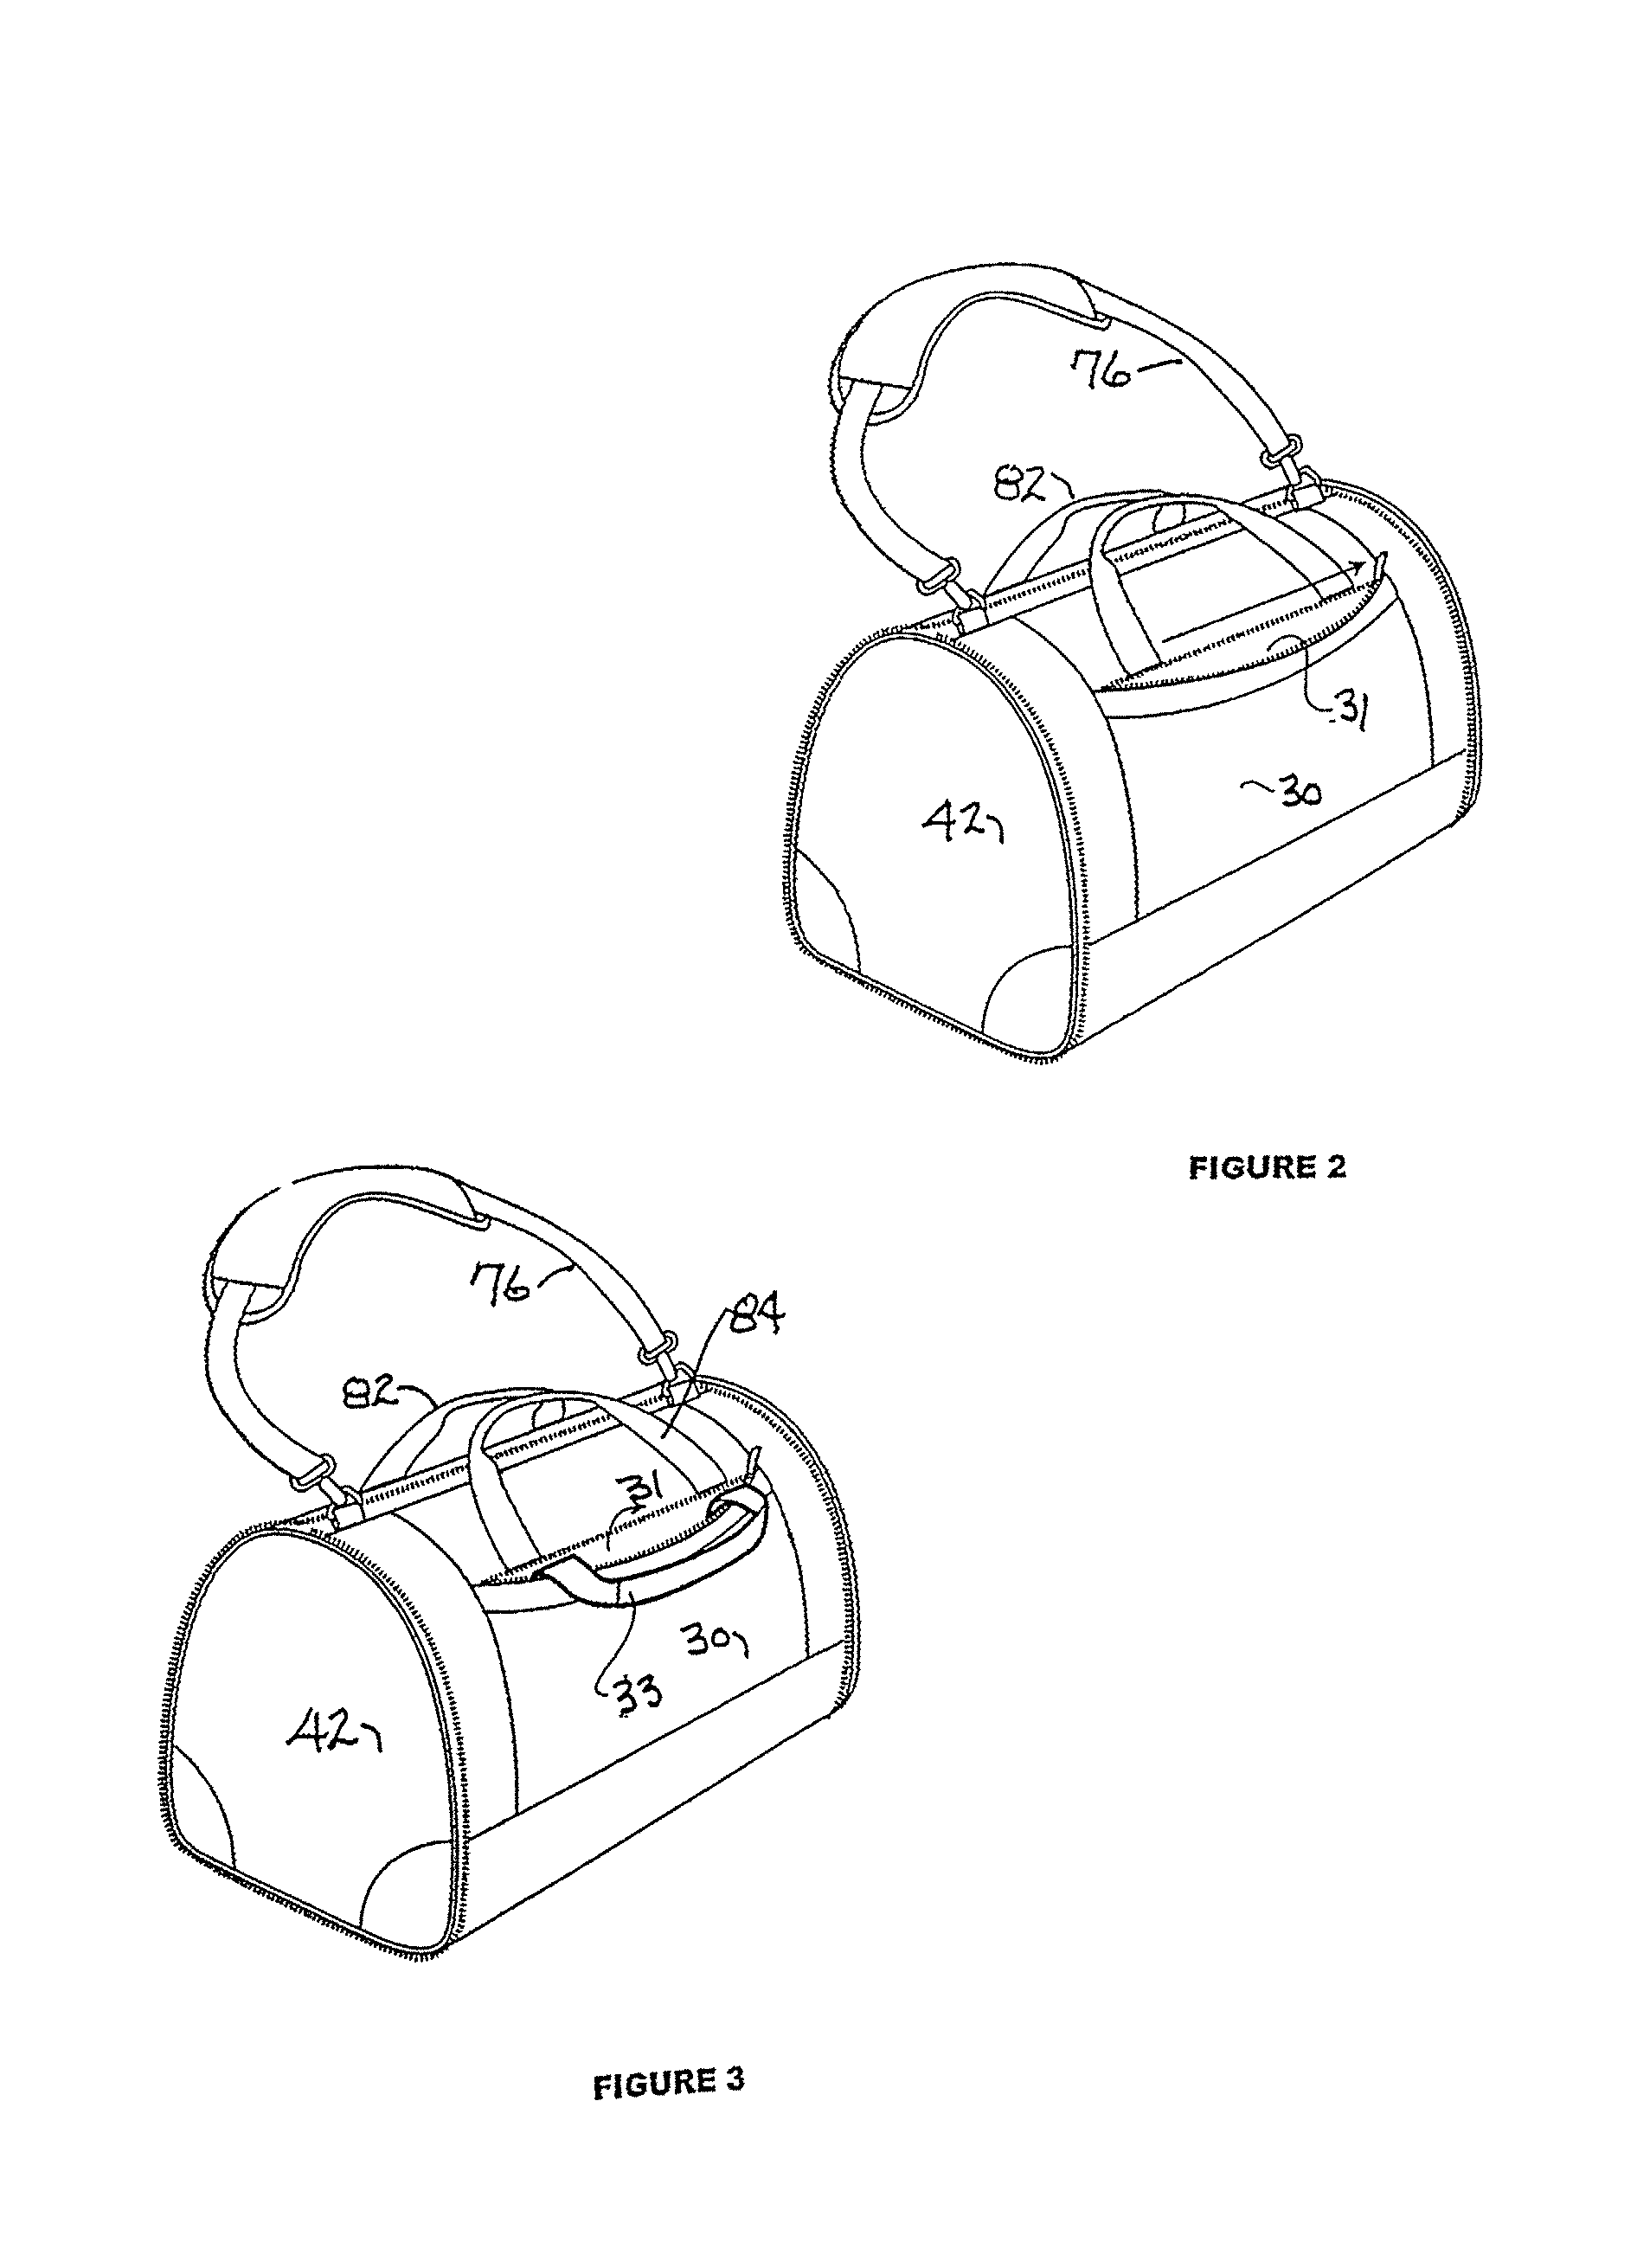 Combination duffle and garment bag